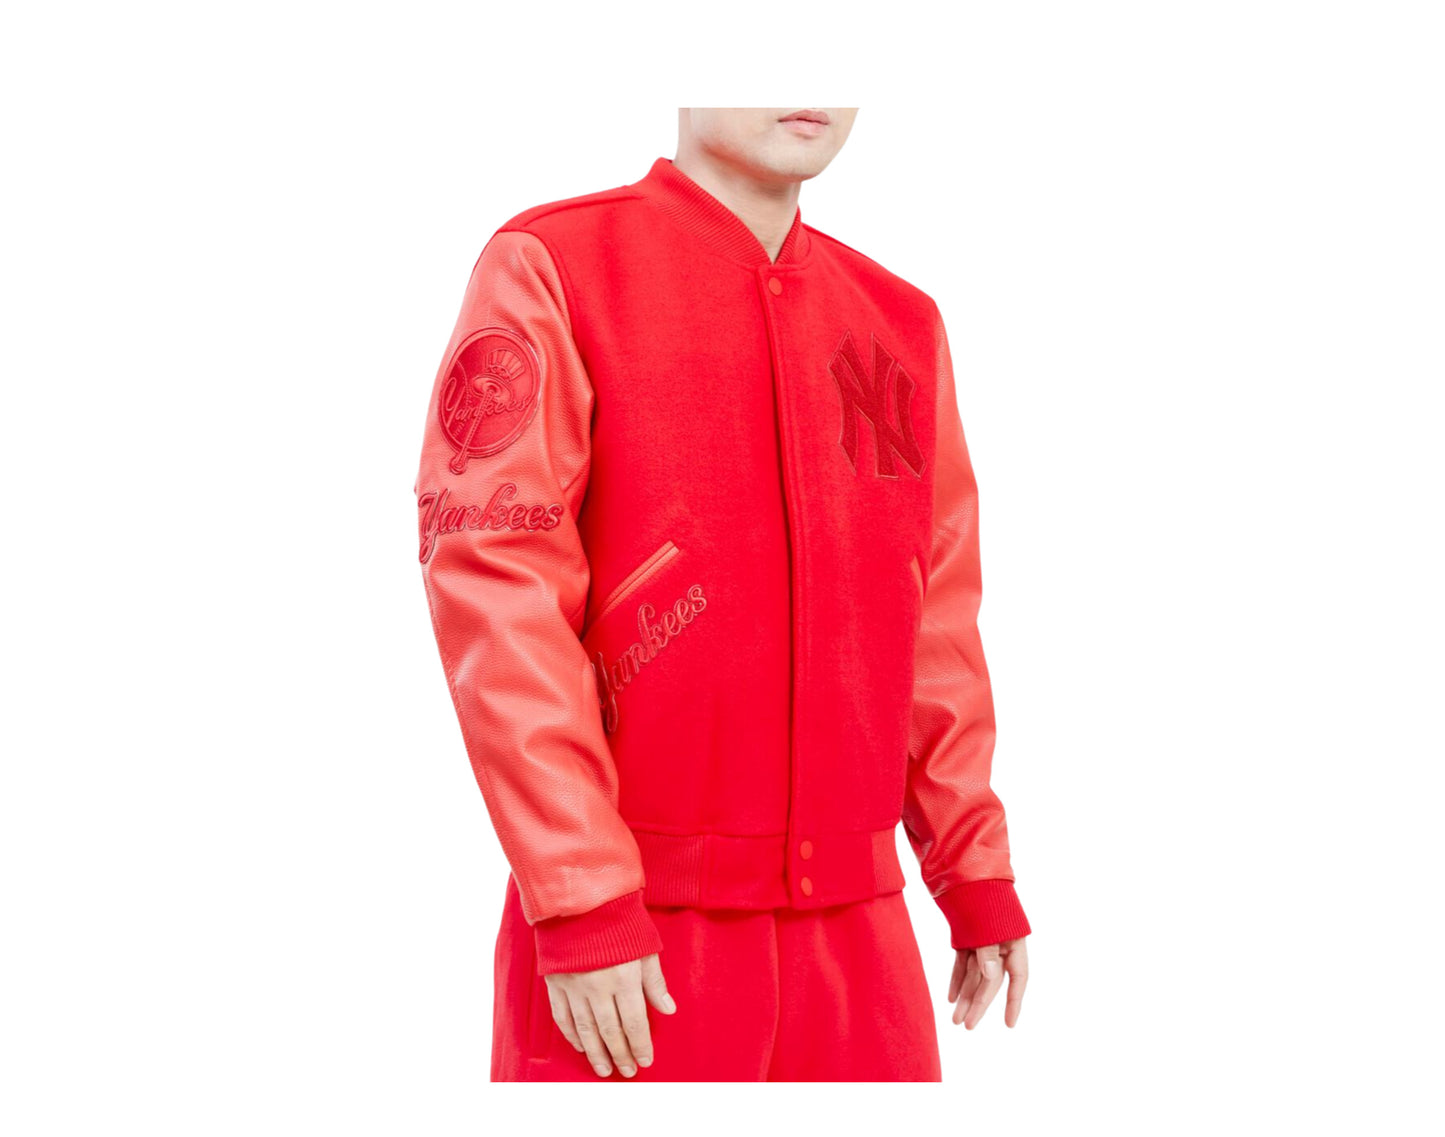 NEW YORK YANKEES CLASSIC TRIPLE RED SATIN JACKET (TRIPLE RED)